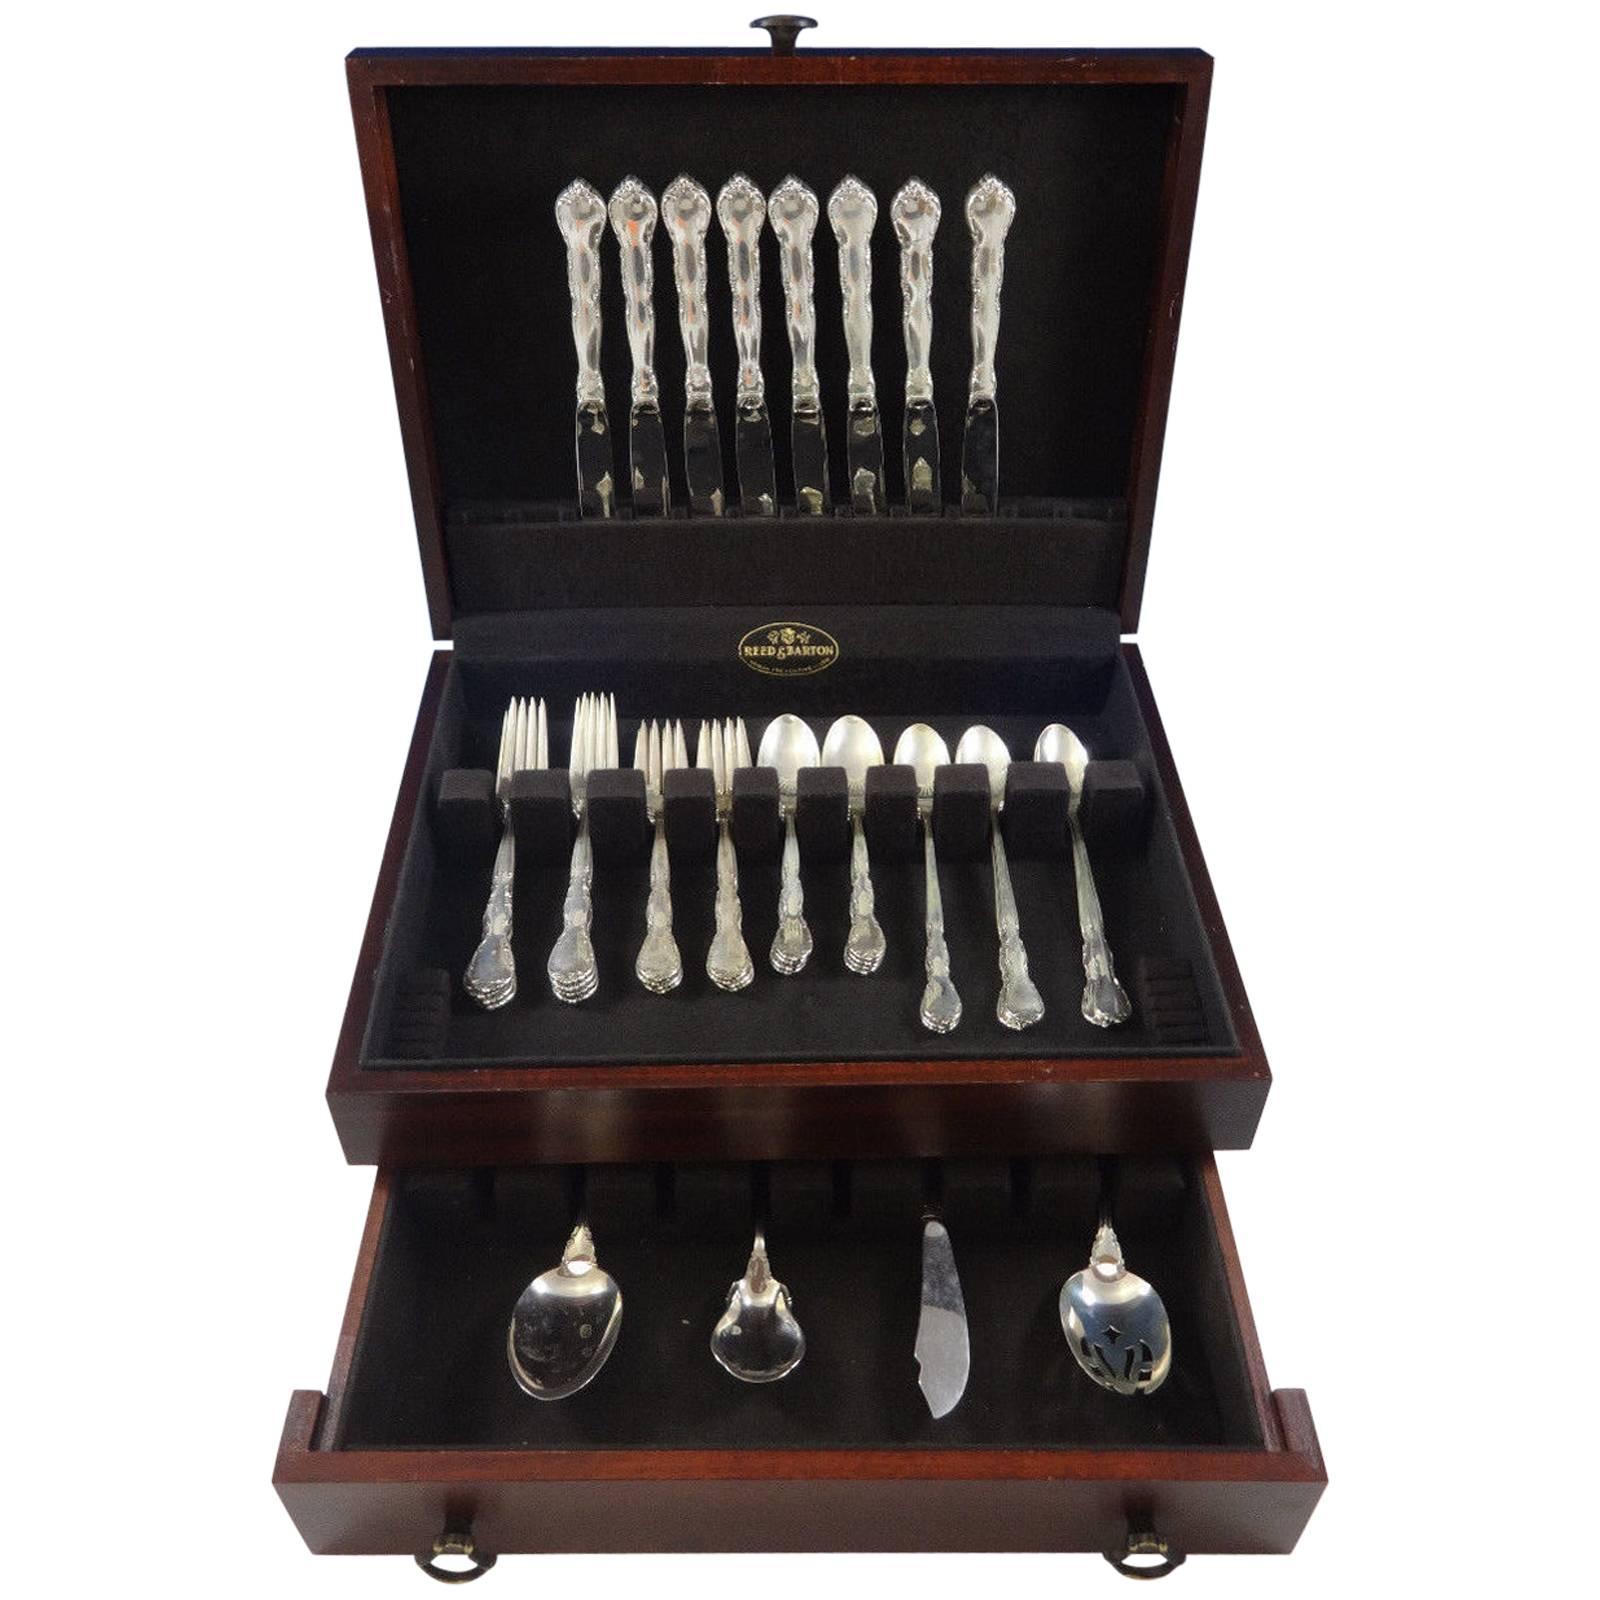 Mignonette by Lunt sterling silver flatware set of 44 pieces. This pattern is very hard to find! This set includes:

Eight knives, 9 1/4